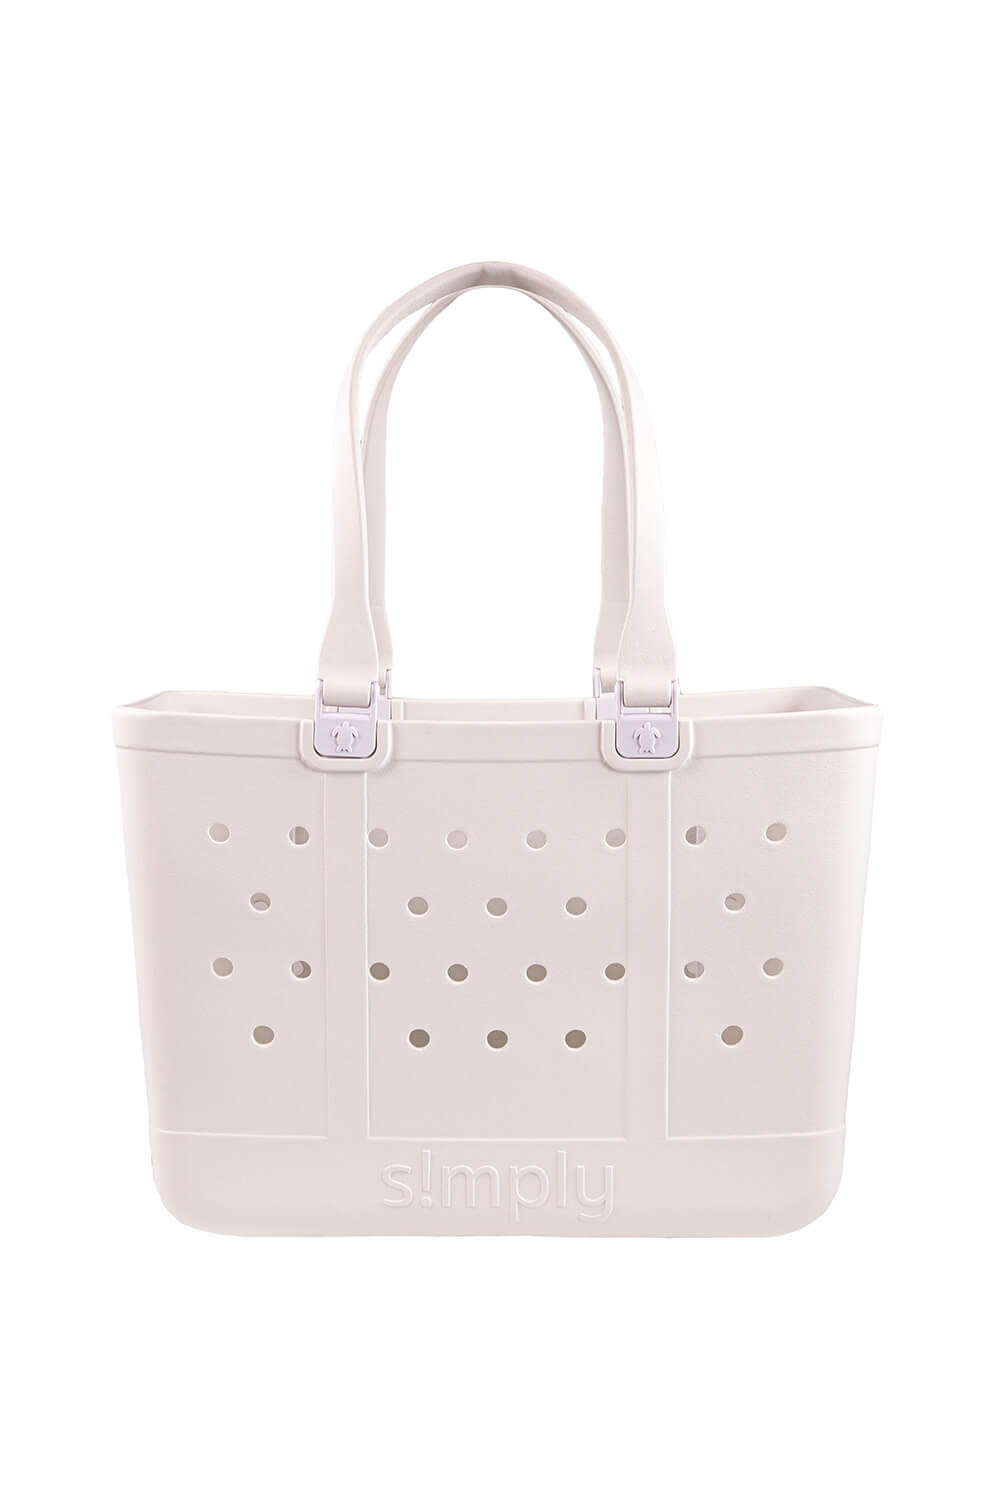 Simply Southern Large Tote White